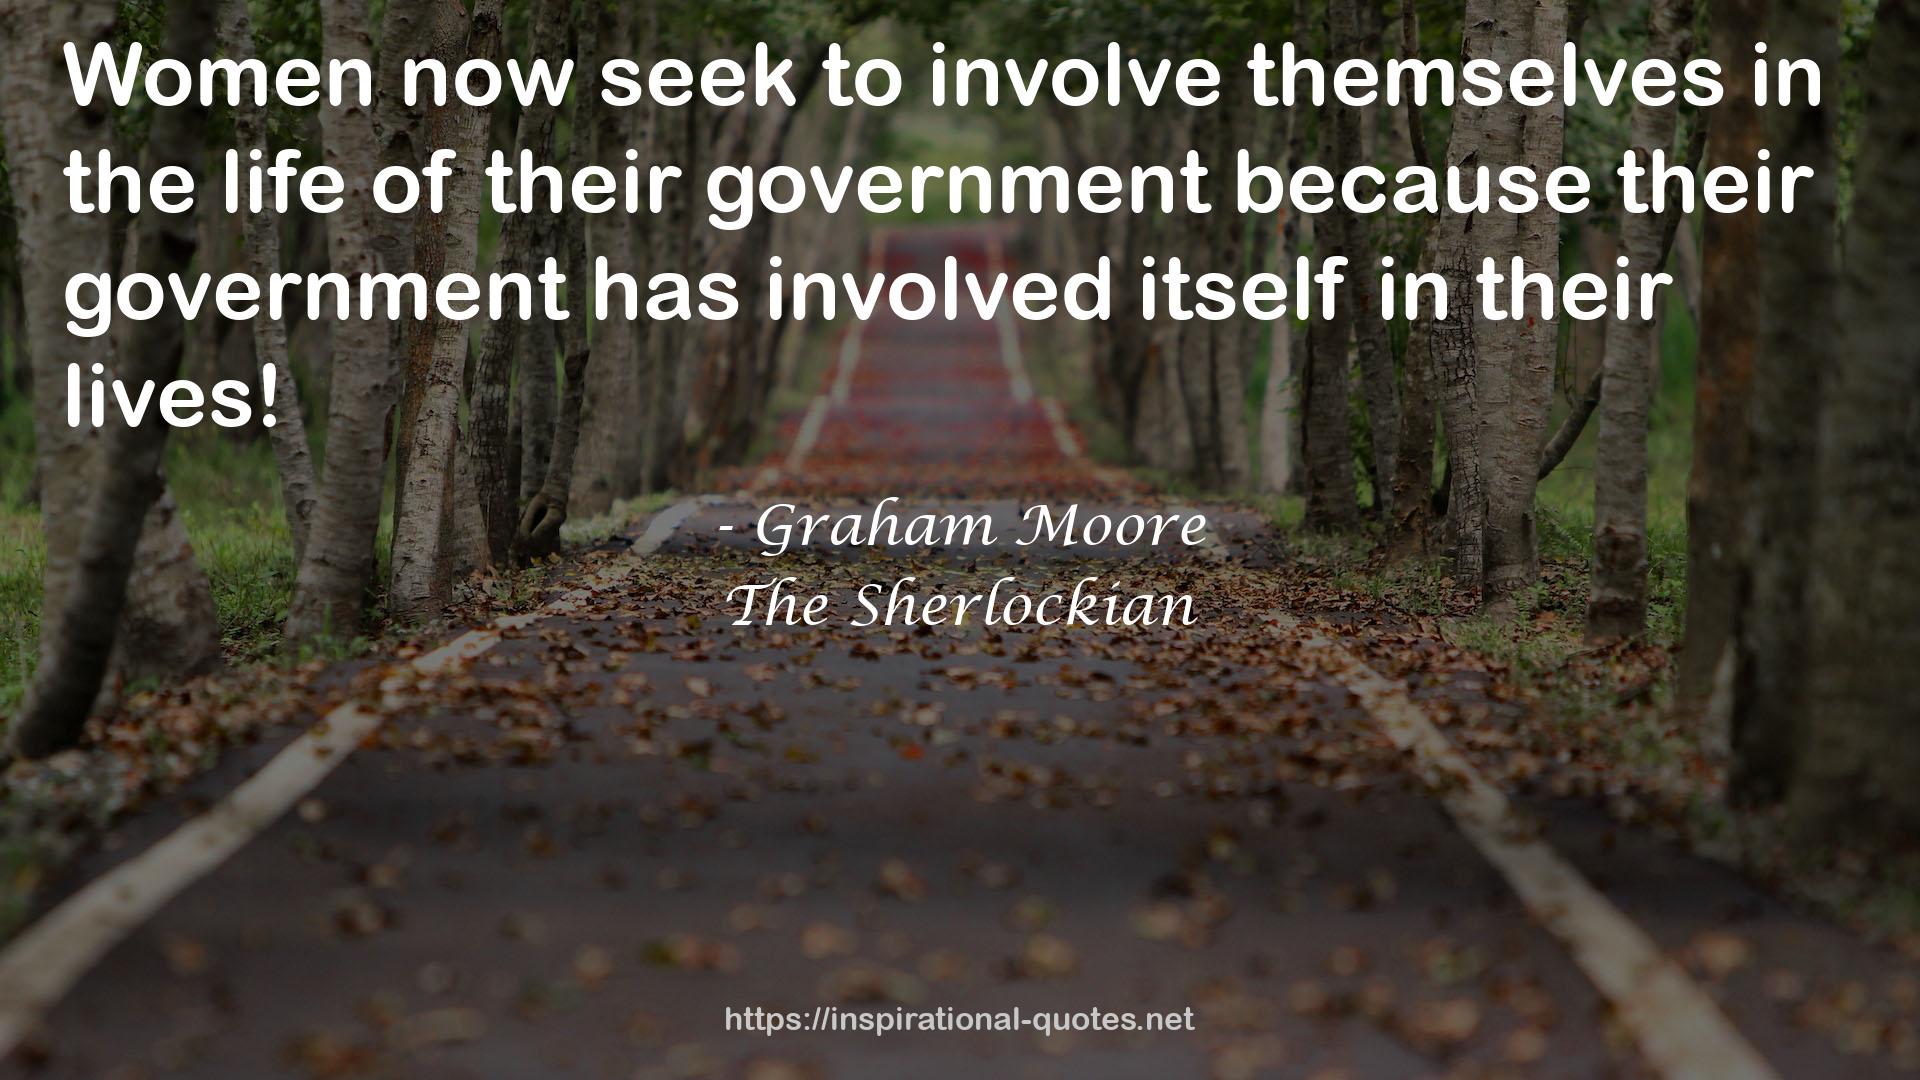 Graham Moore QUOTES